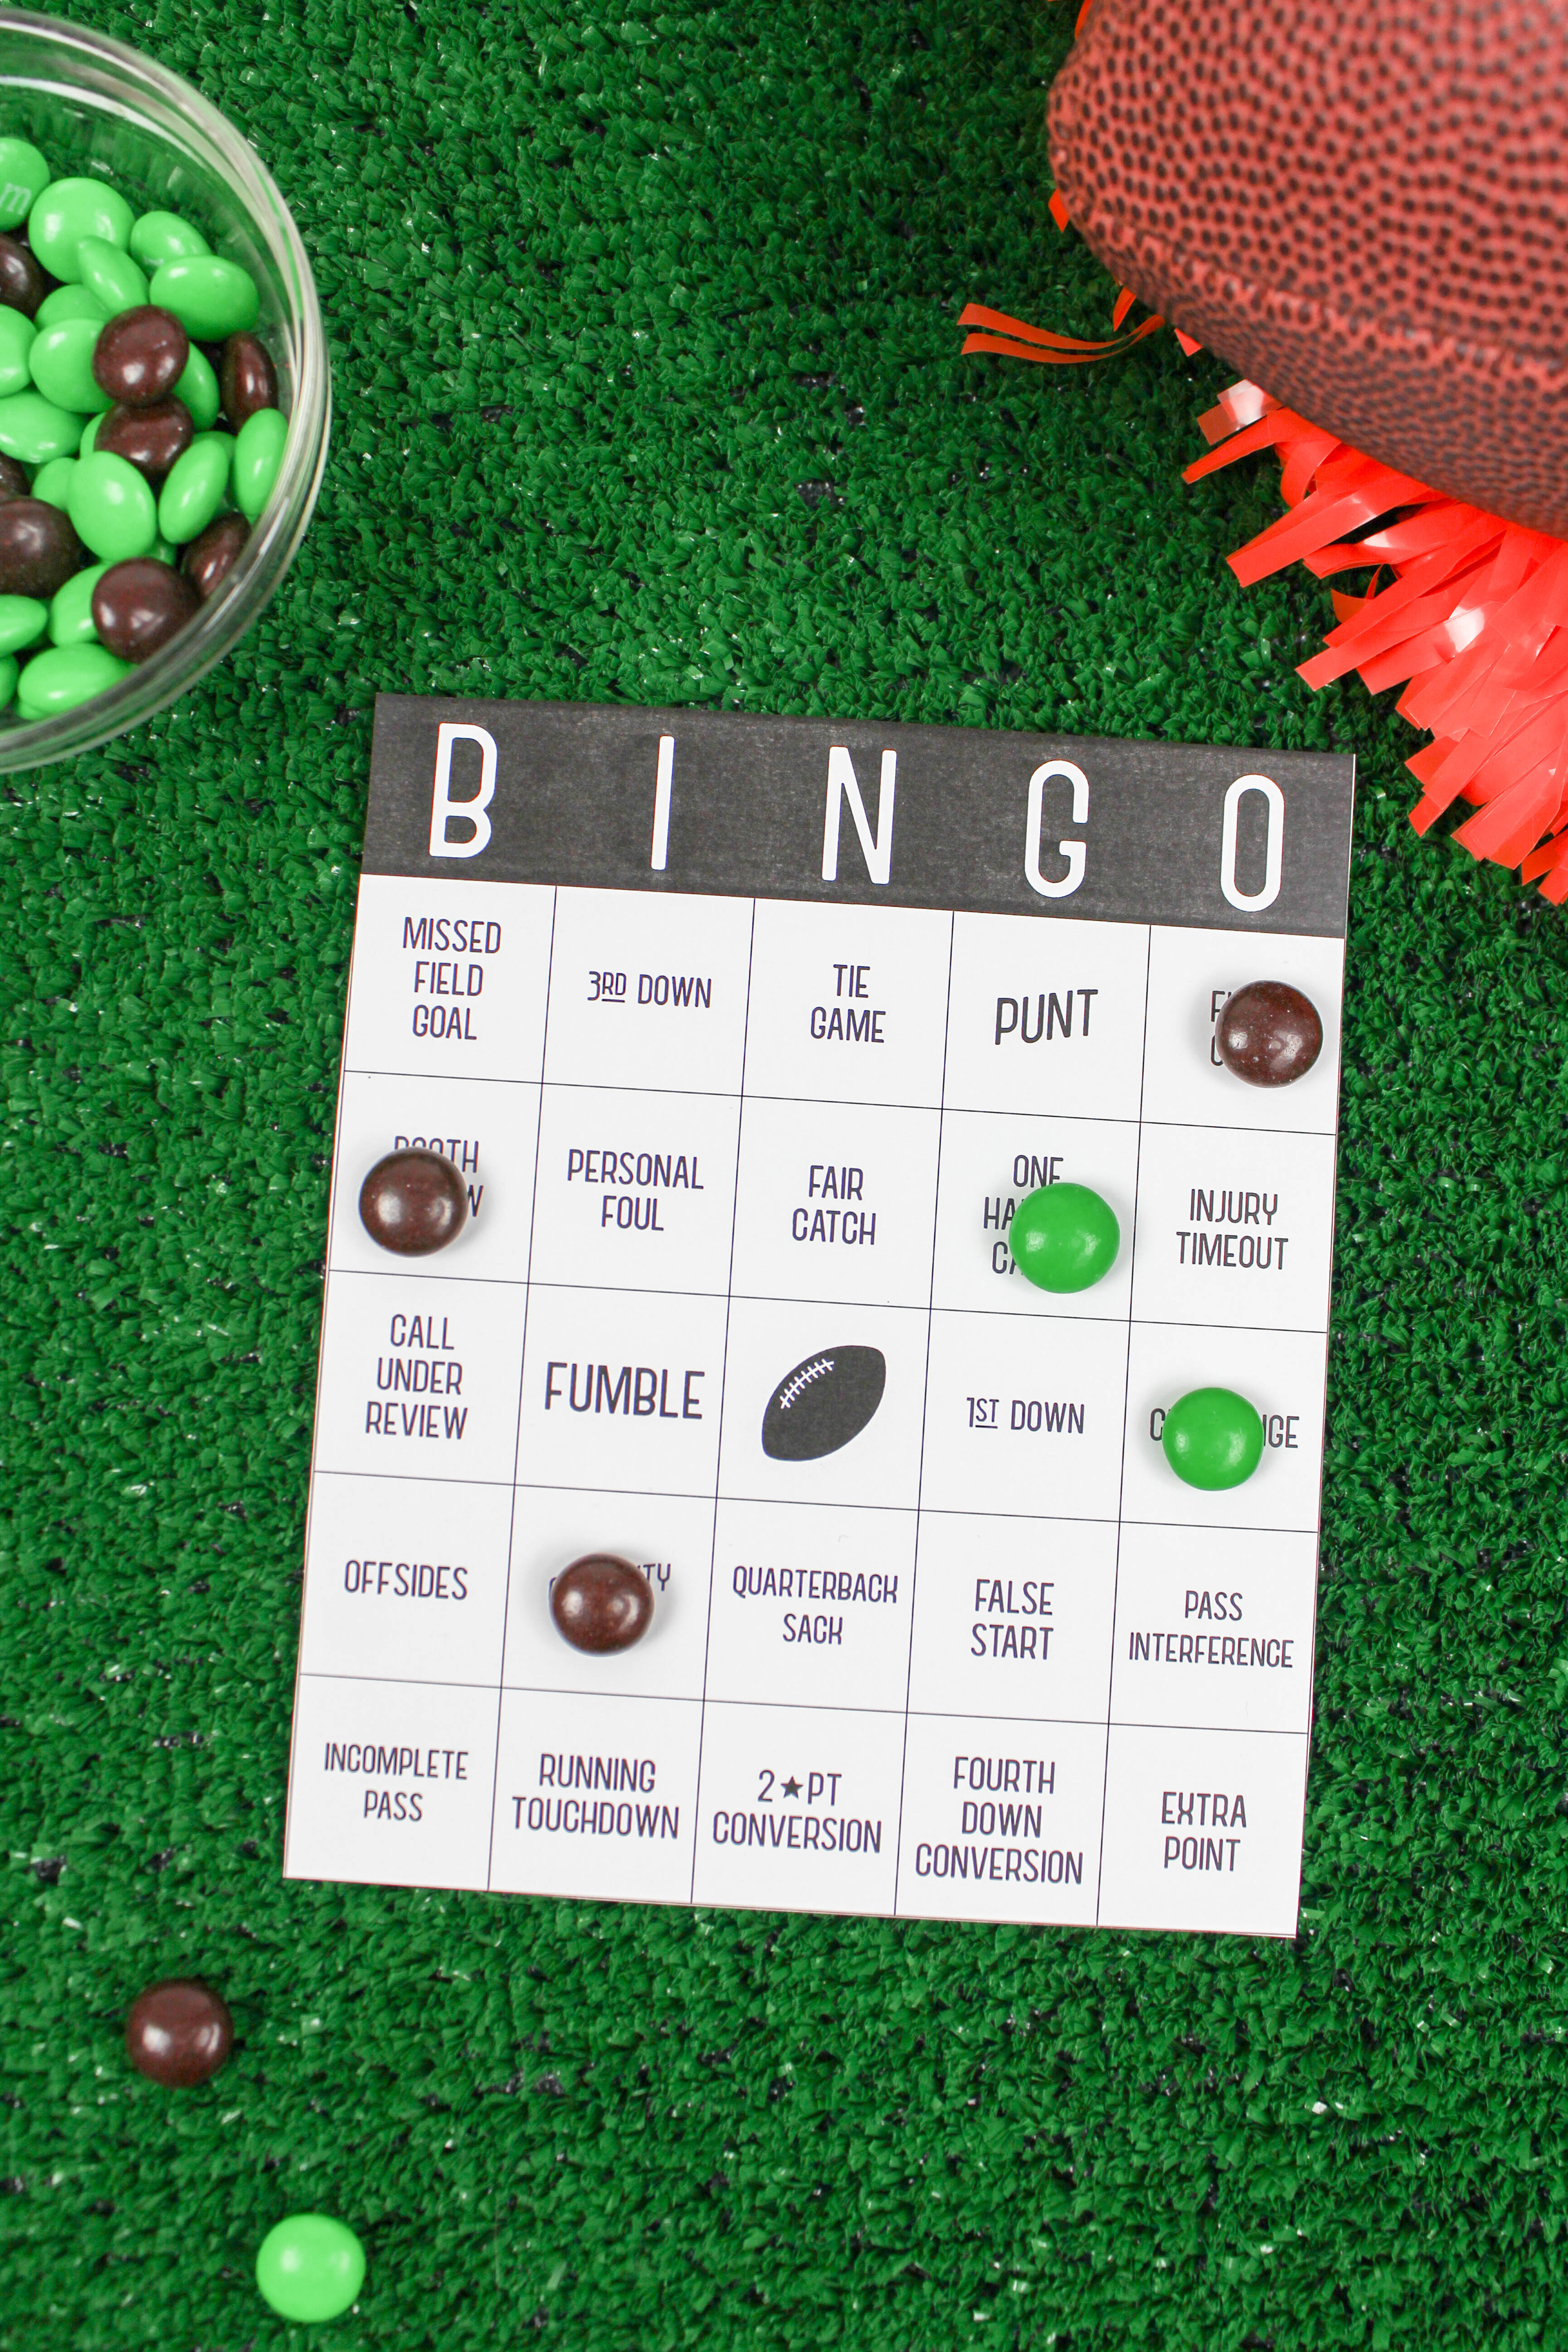 Free Game Day Party Printables from Printabelle, Catch My Party